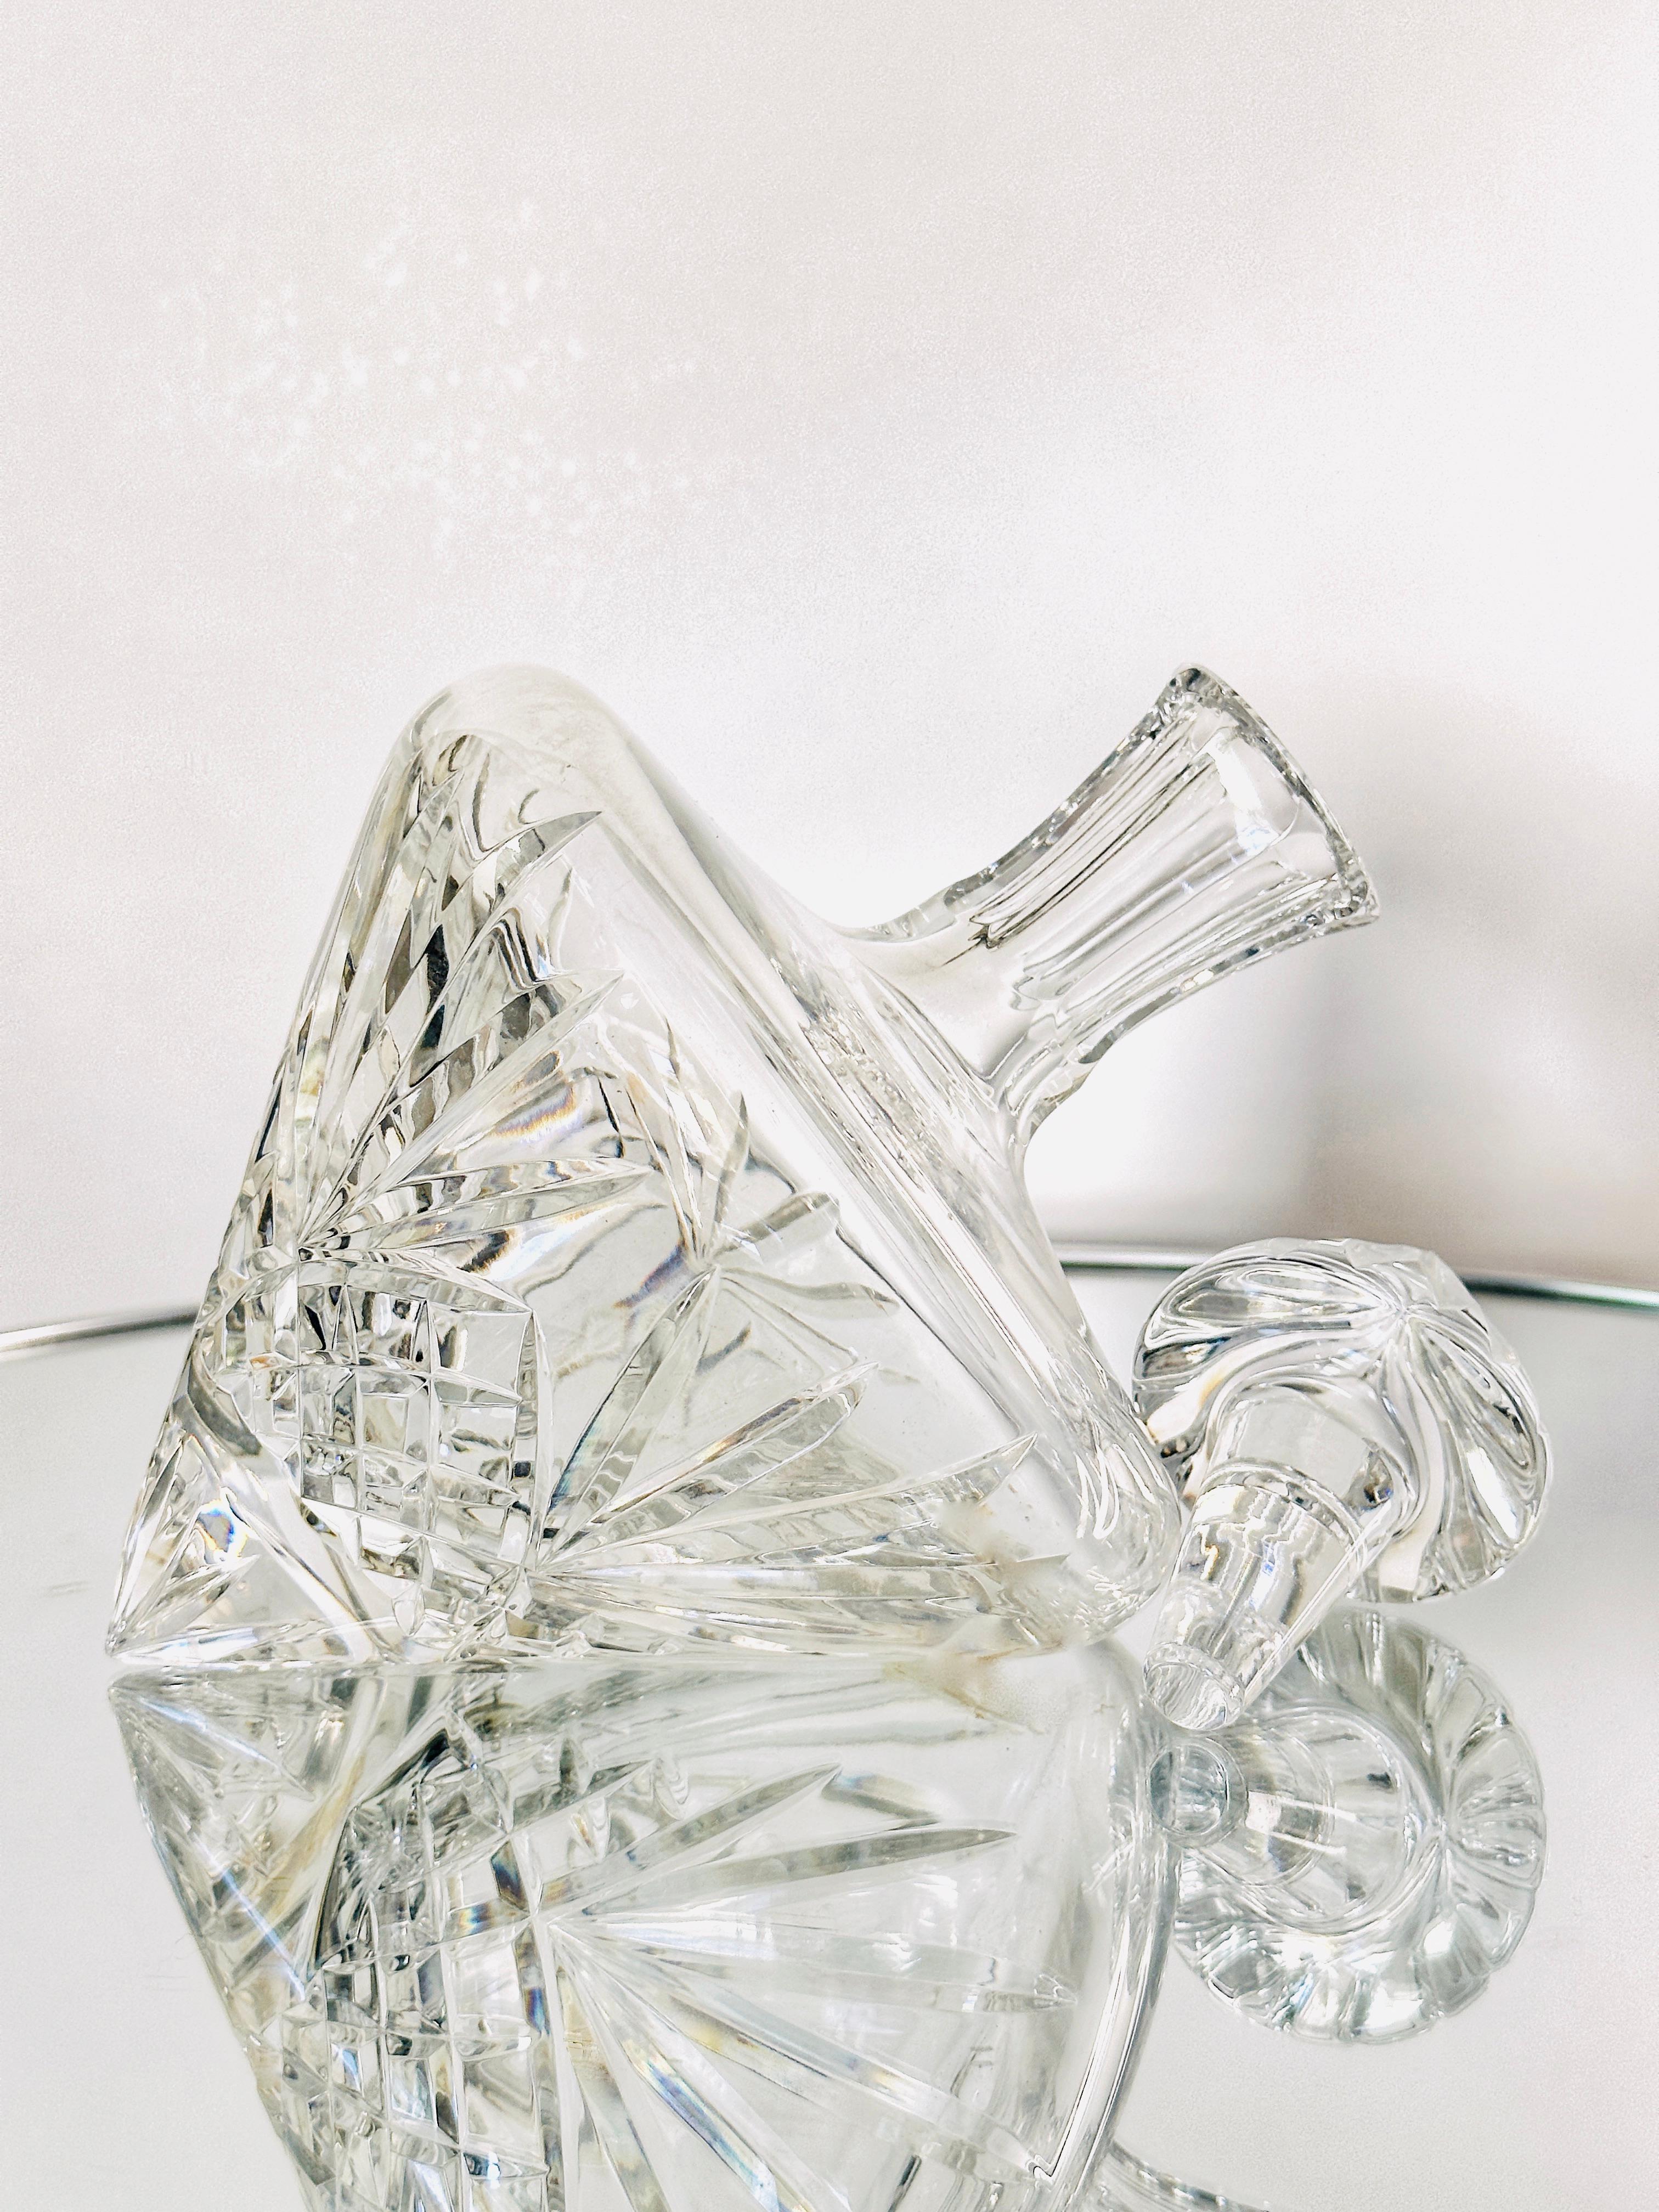 Vintage Waterford Crystal Leaning Decanter with Etched Designs, circa 1980 4